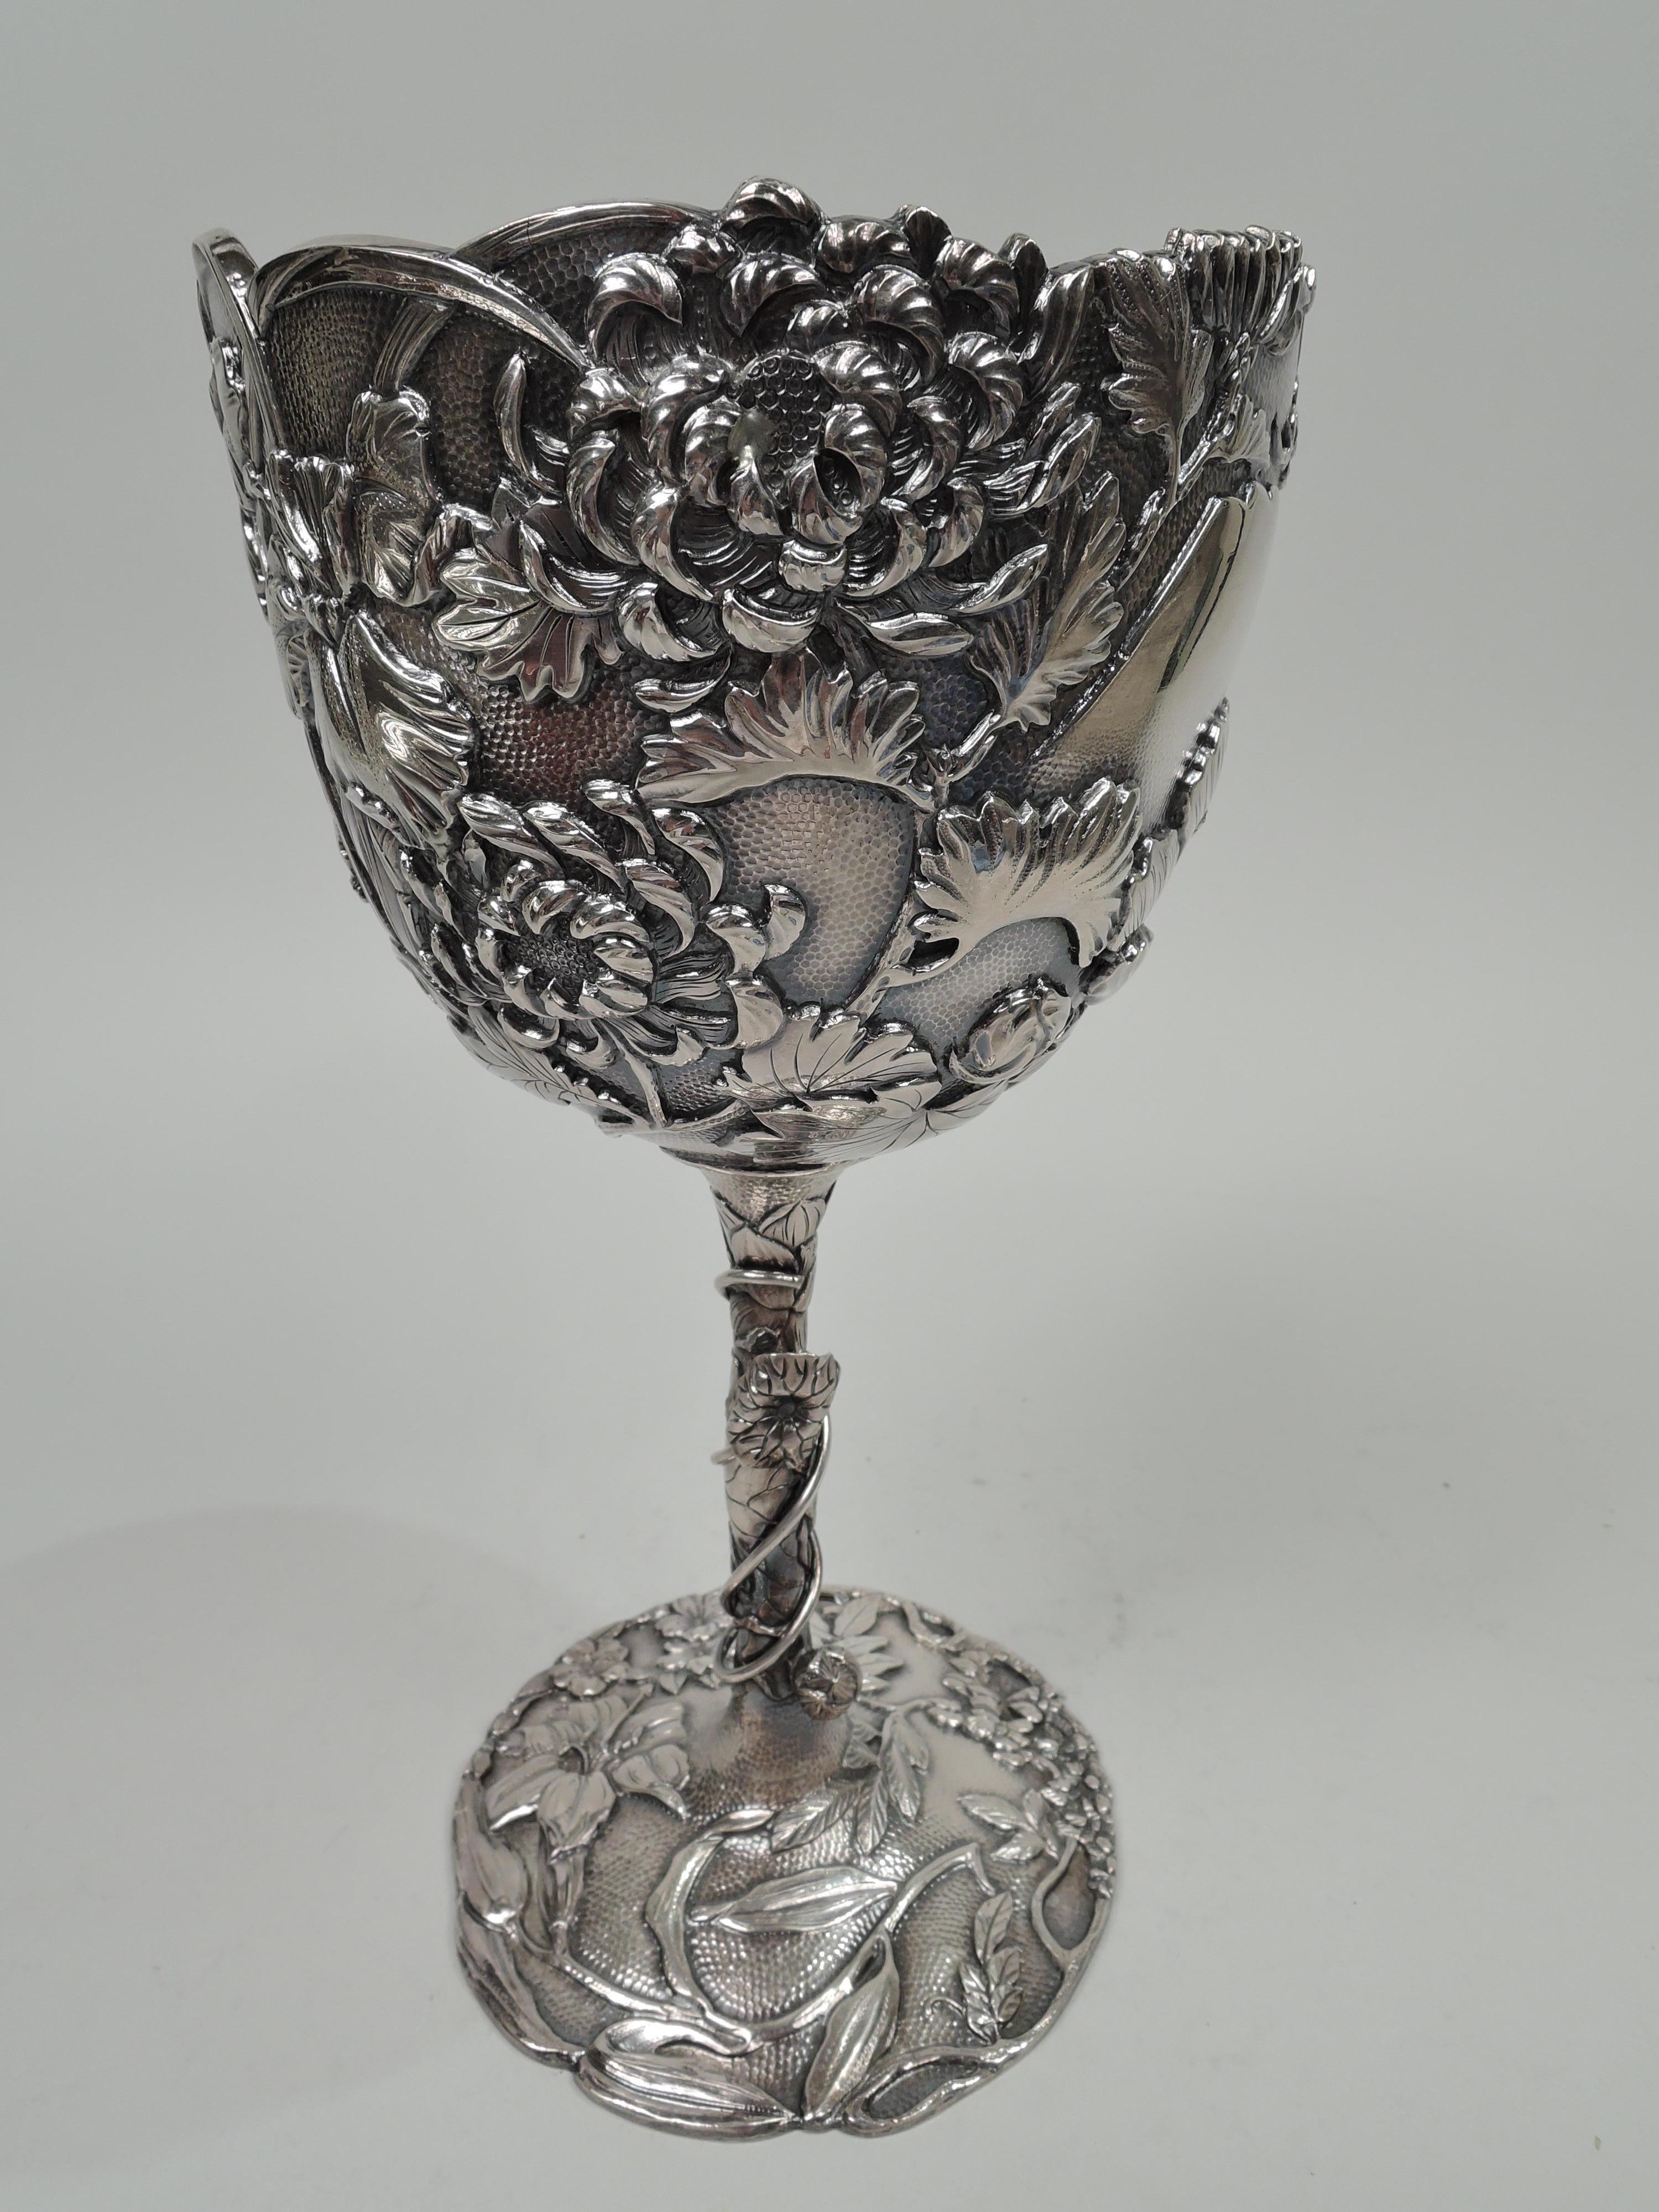 Large Japanese Meiji silver chalice, ca 1890. Oval bowl with irregular rim on tall cylindrical shaft flowing into raised and scalloped foot. Spout hammered ground. Double walled. Applied iris and chrysanthemum flowers and blossoming branches. Wire